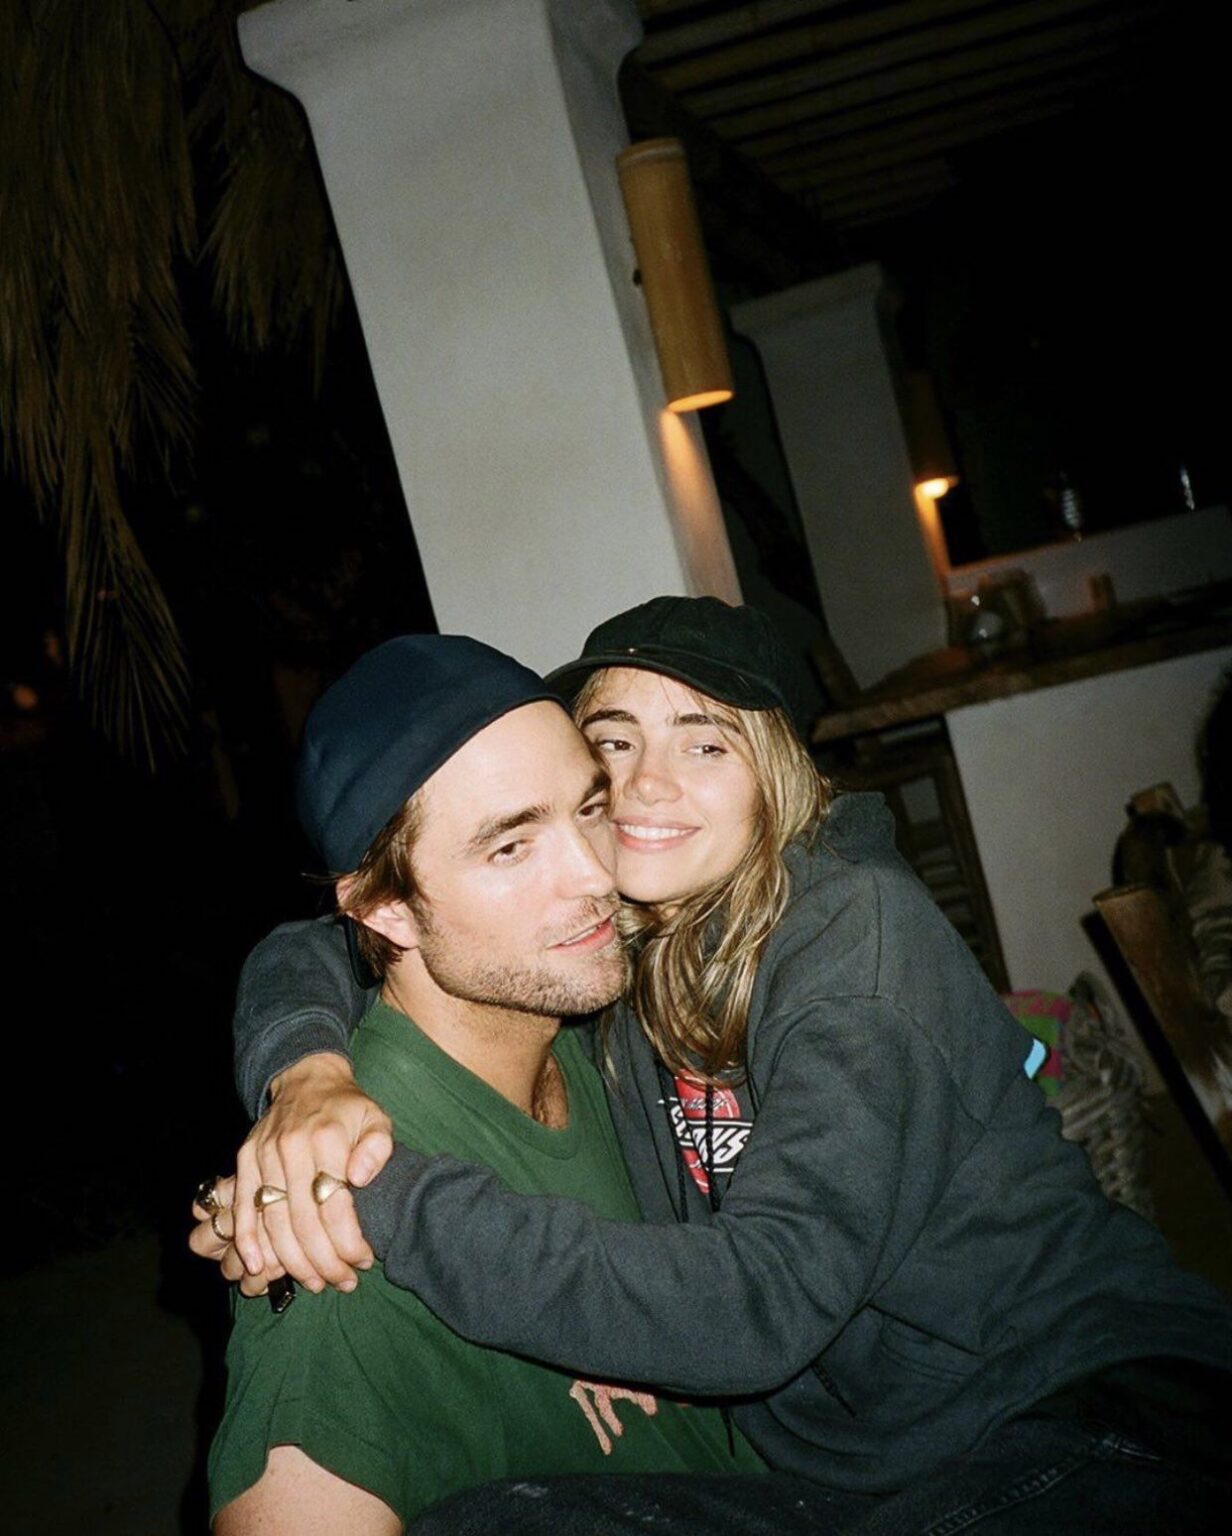 Robert Pattinson appears to be madly in love with his girlfriend of two years, Suki Waterhouse. Will they be getting married soon?